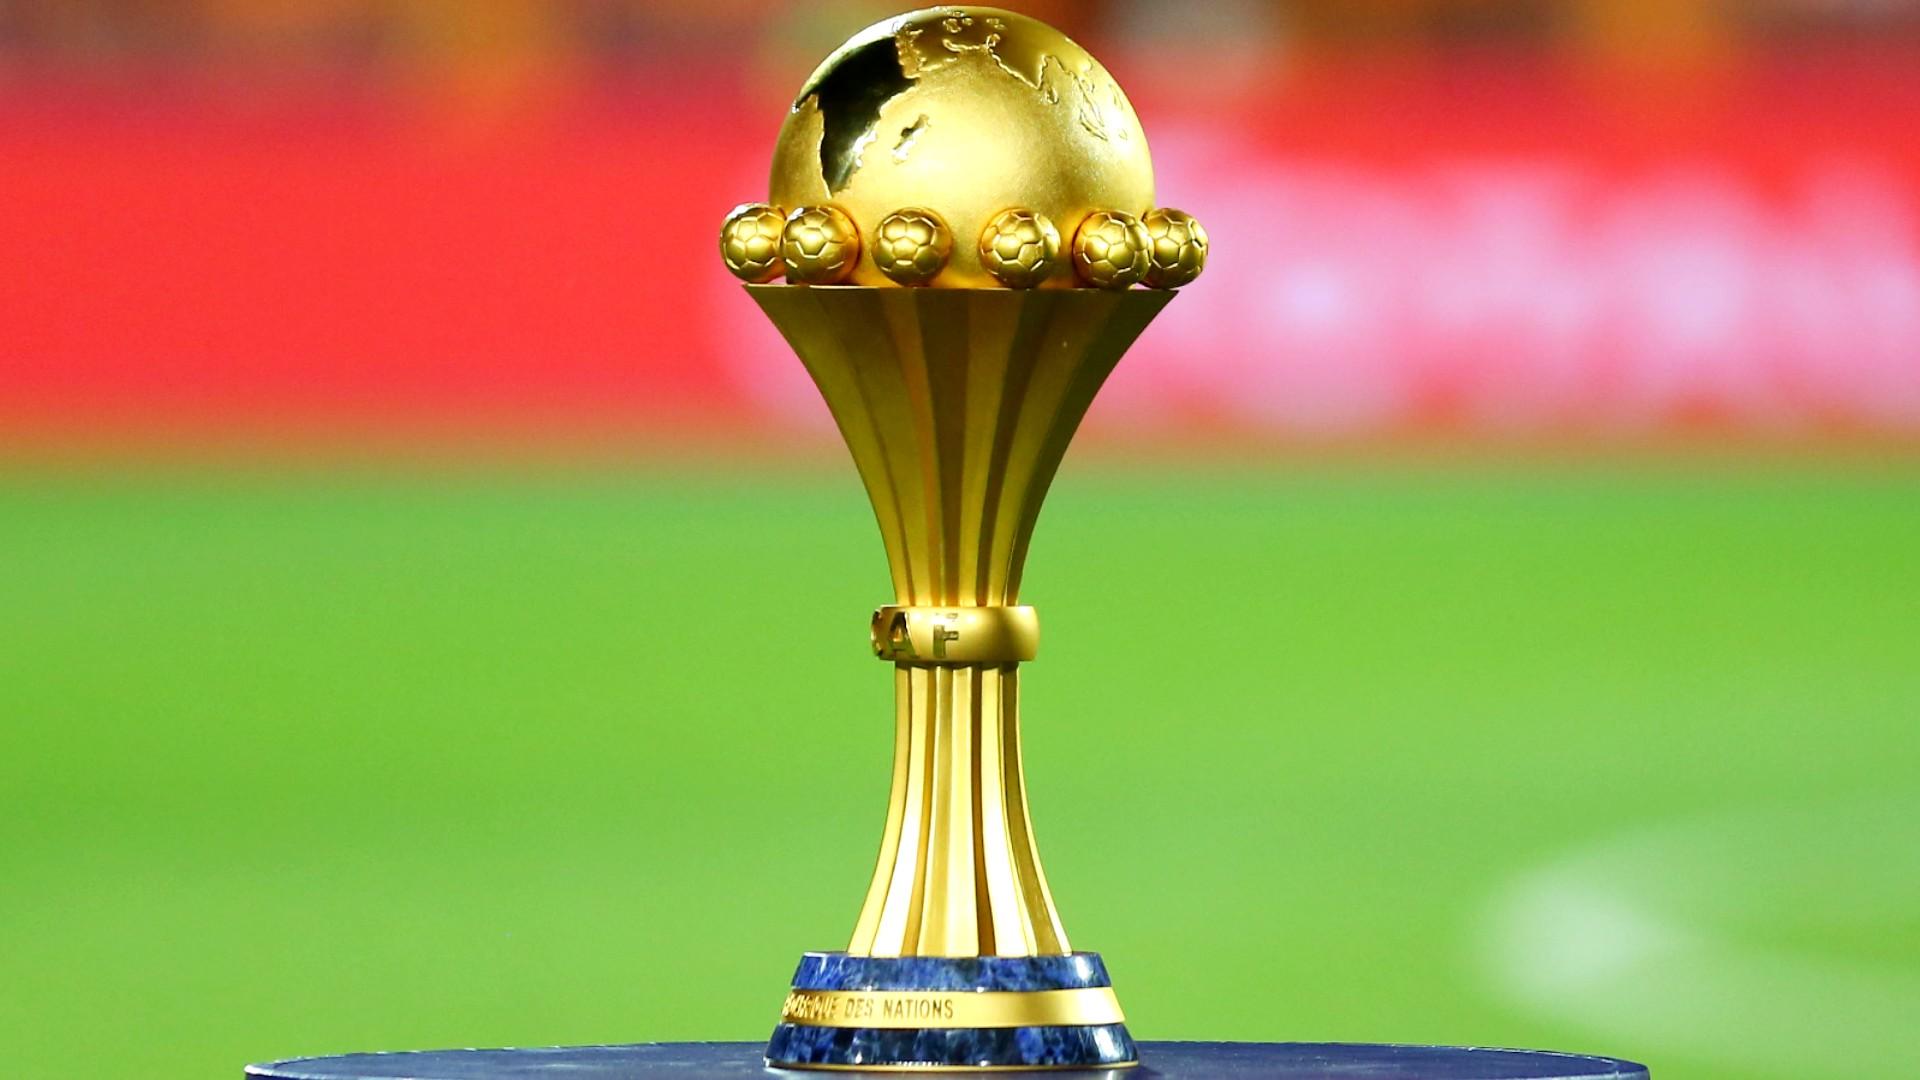 Afcon 2023: Grand finale awaits between hosts Ivory Coast and Nigeria